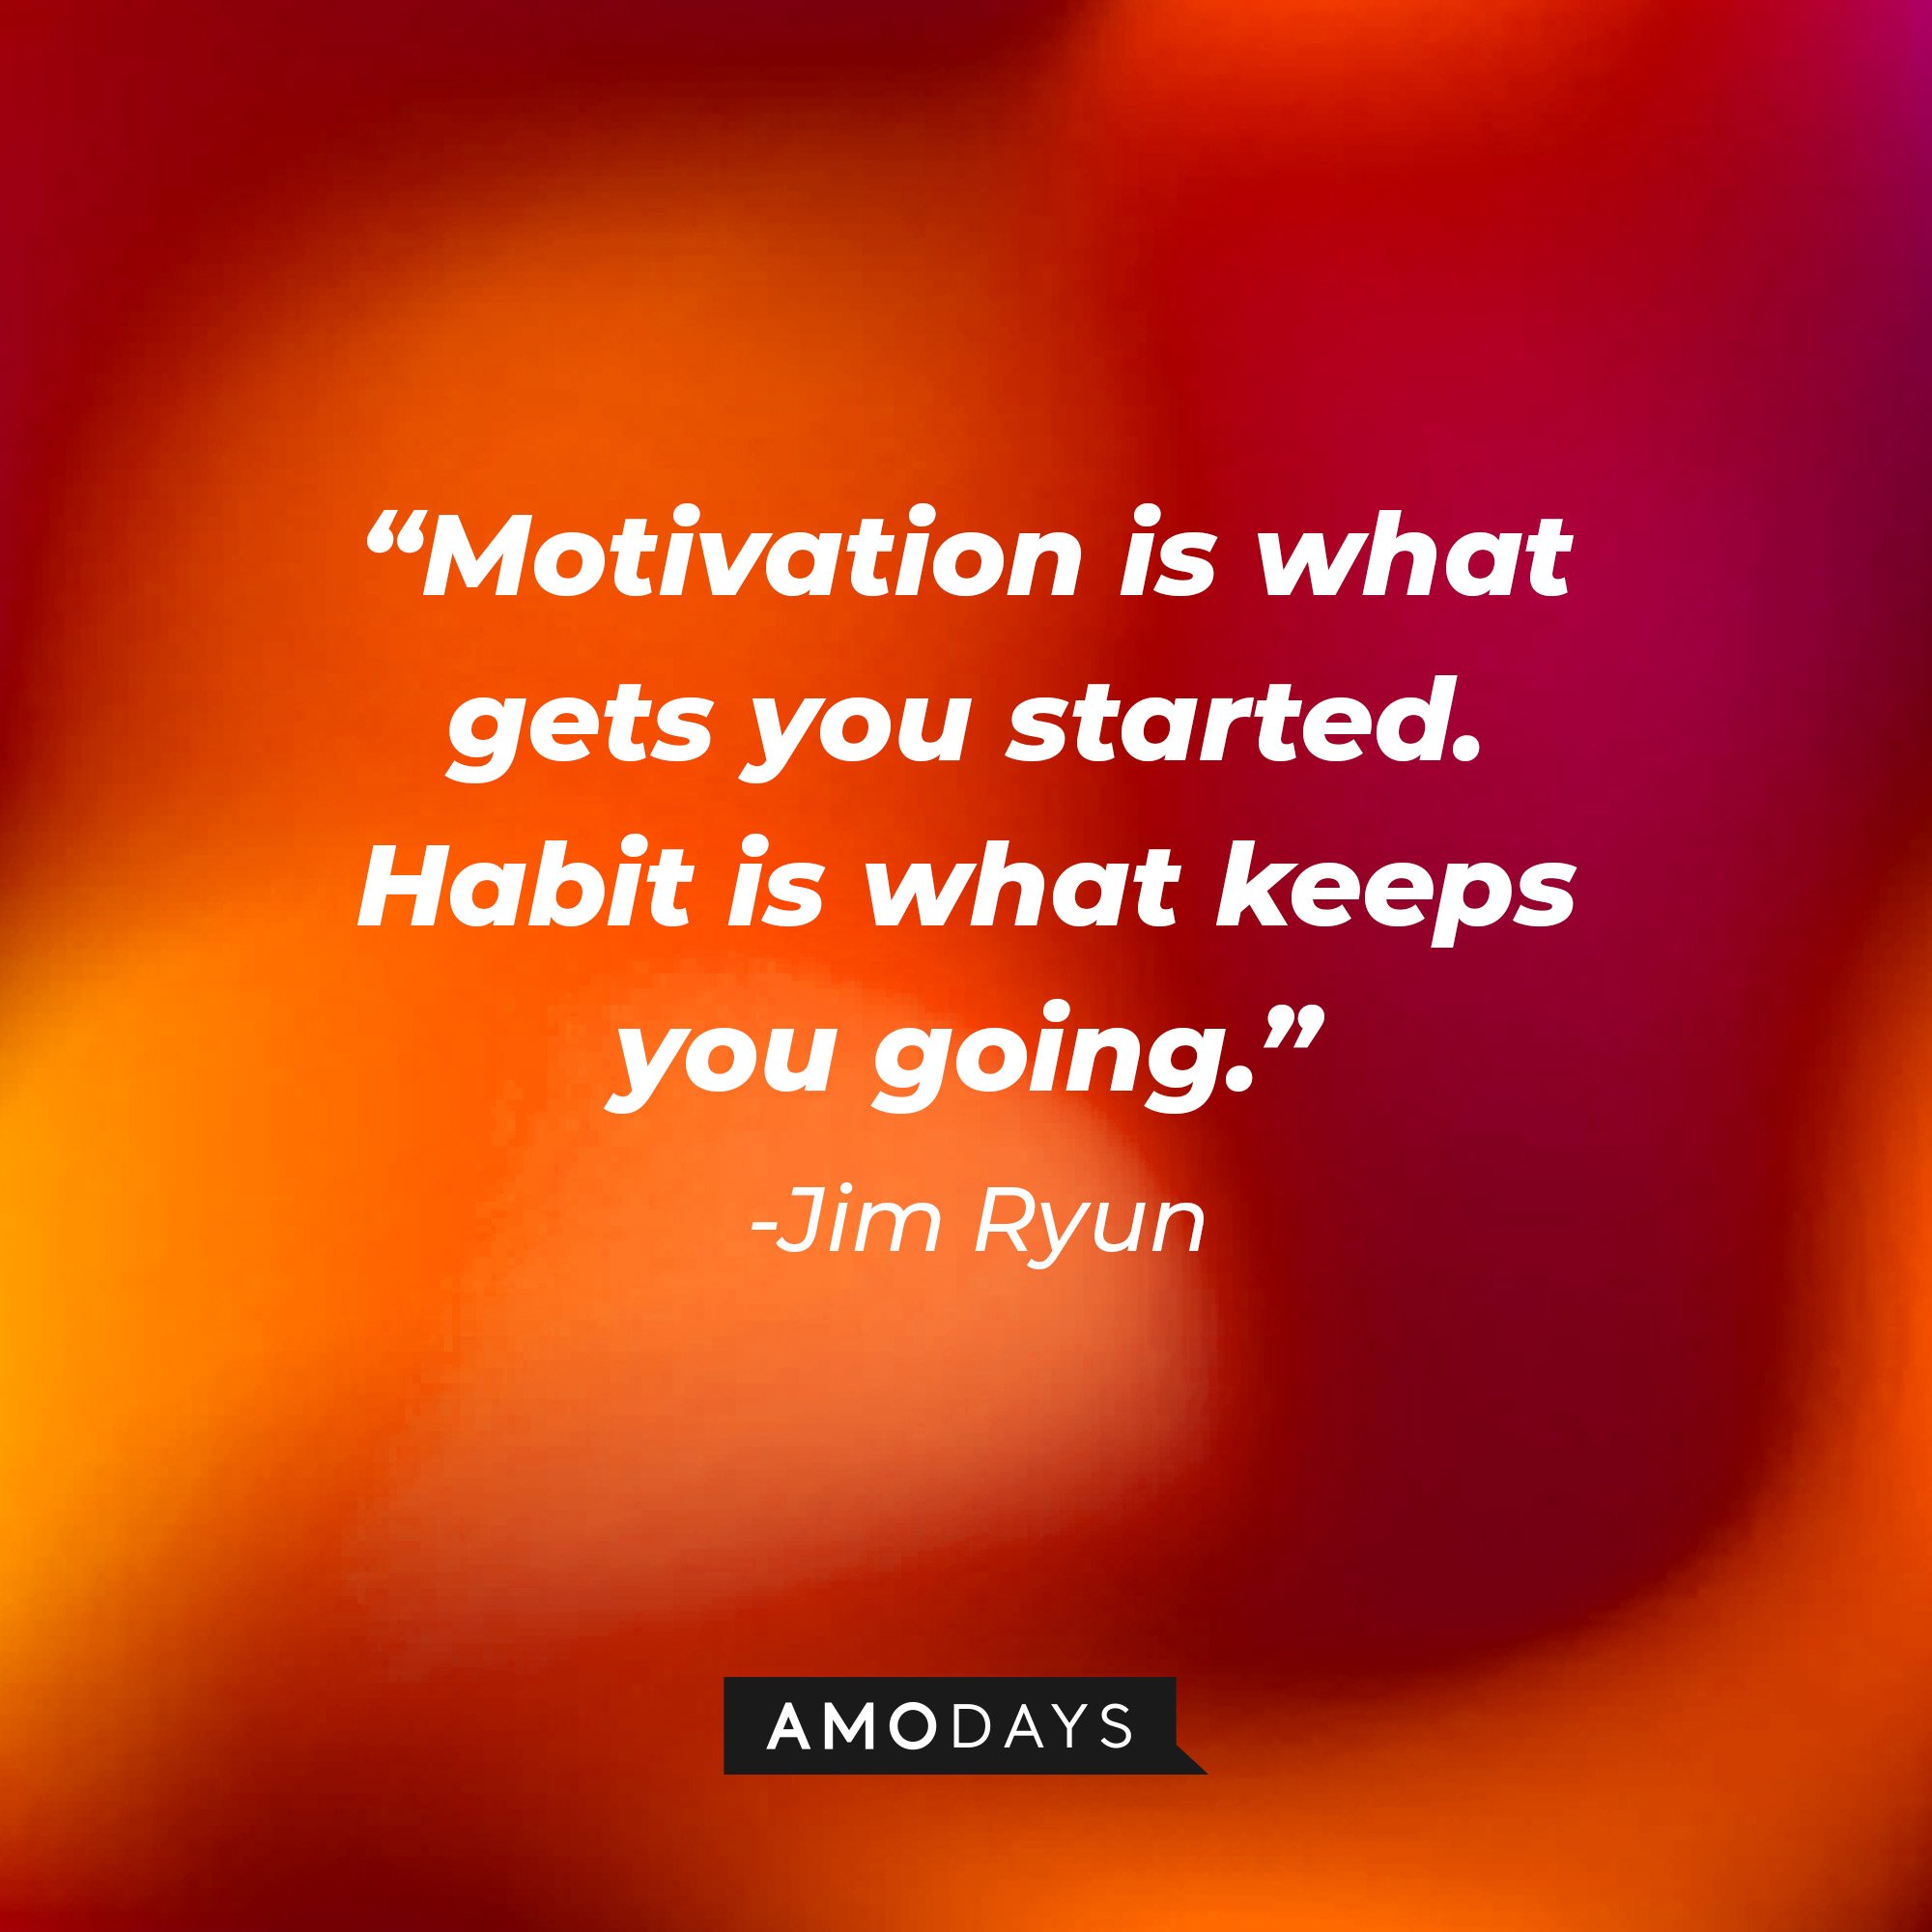 Jim Ryun's quote: “Motivation is what gets you started. Habit is what keeps you going.” | Image: AmoDays